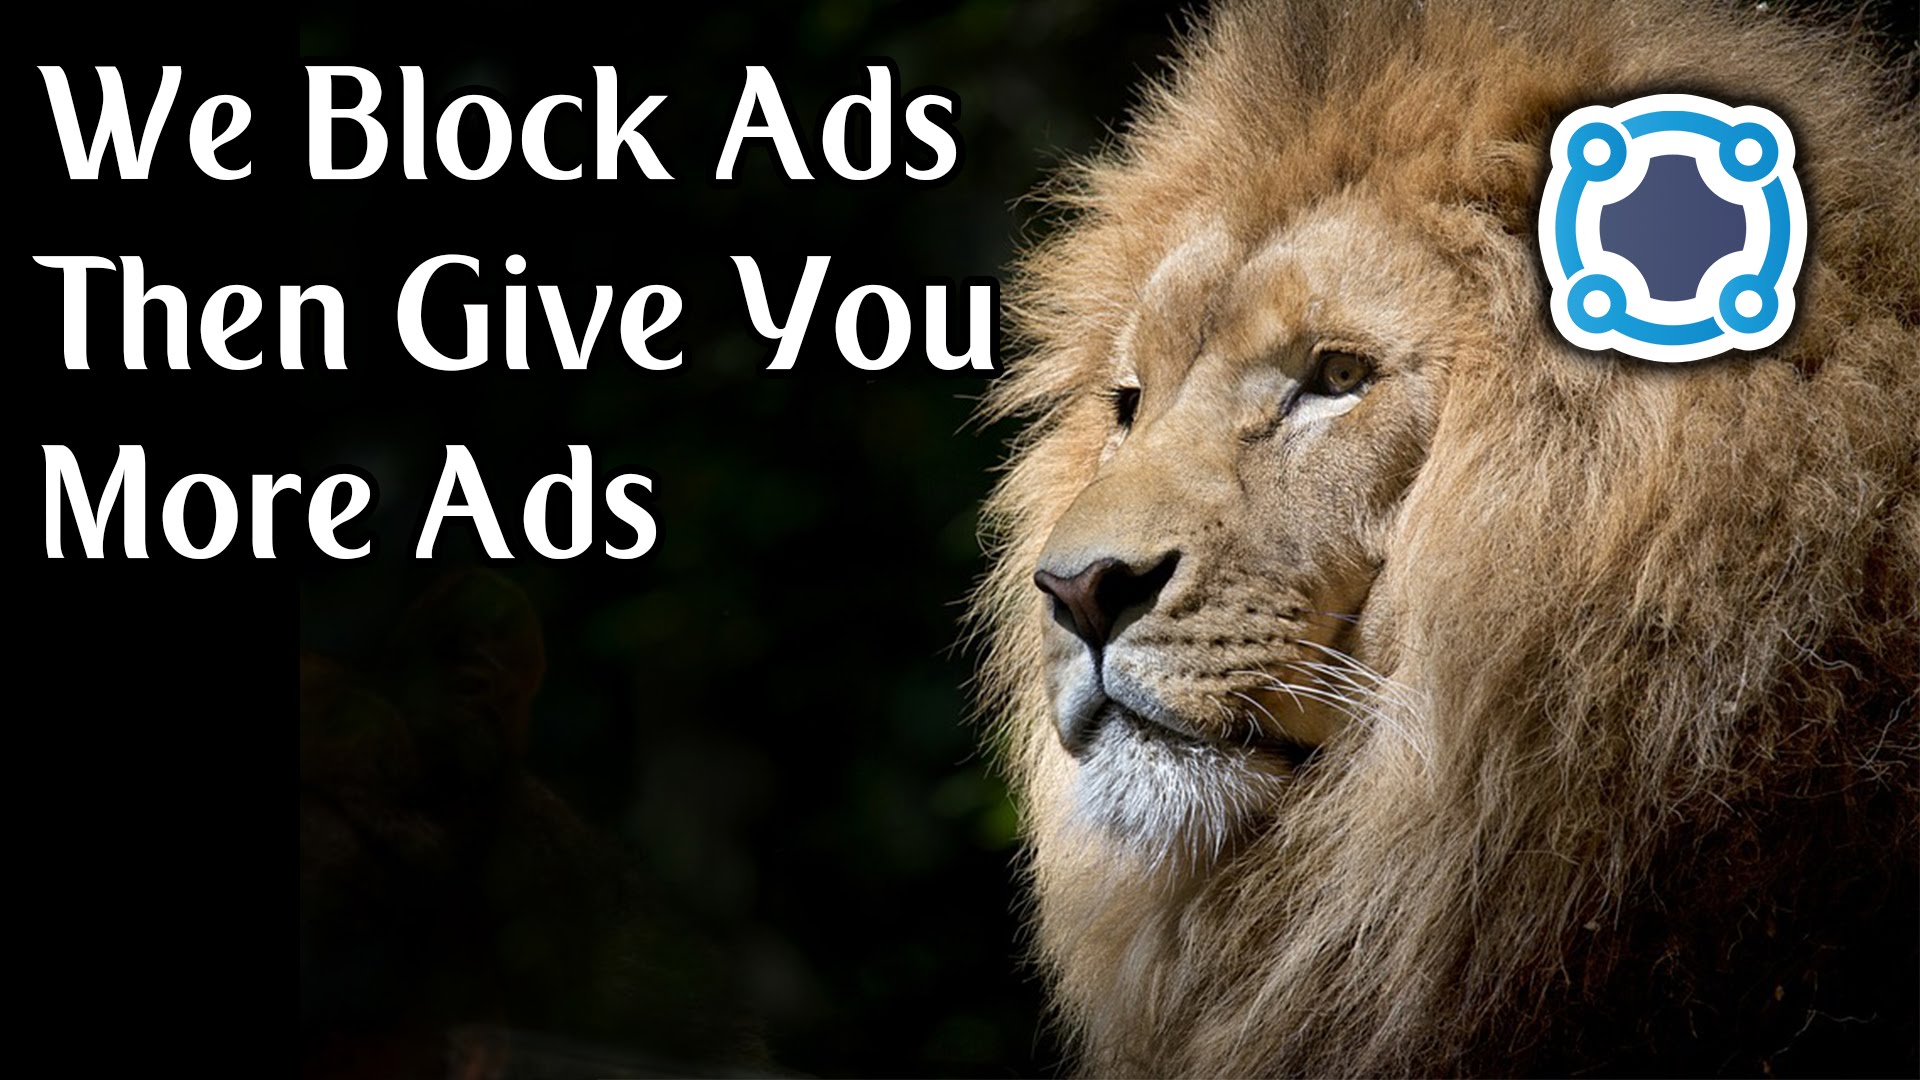 Brave -- A Web Browser That Blocks Ads By Default (Or Does It?)